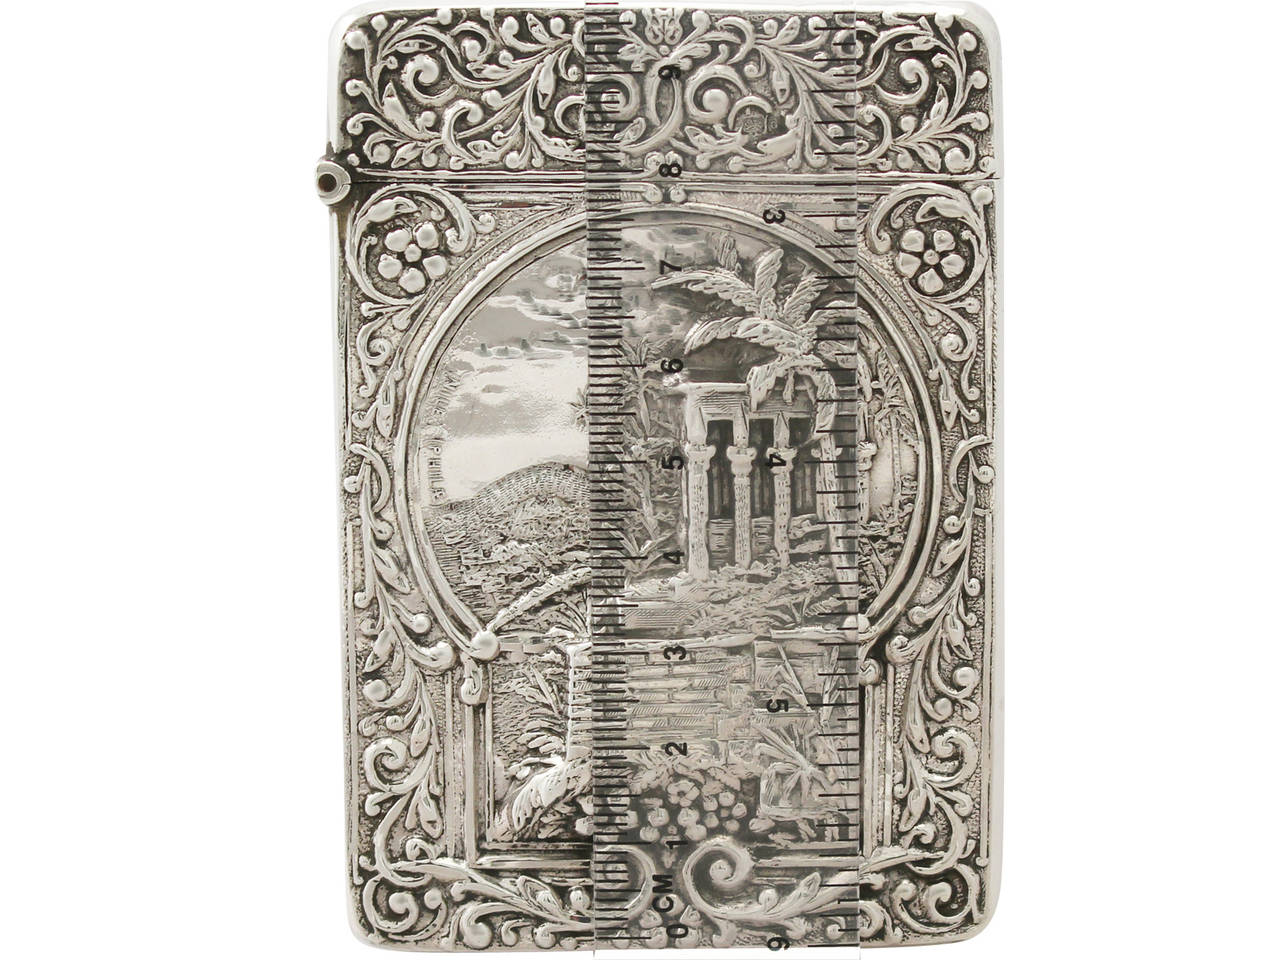 Early 20th Century Edwardian Sterling Silver Card Case